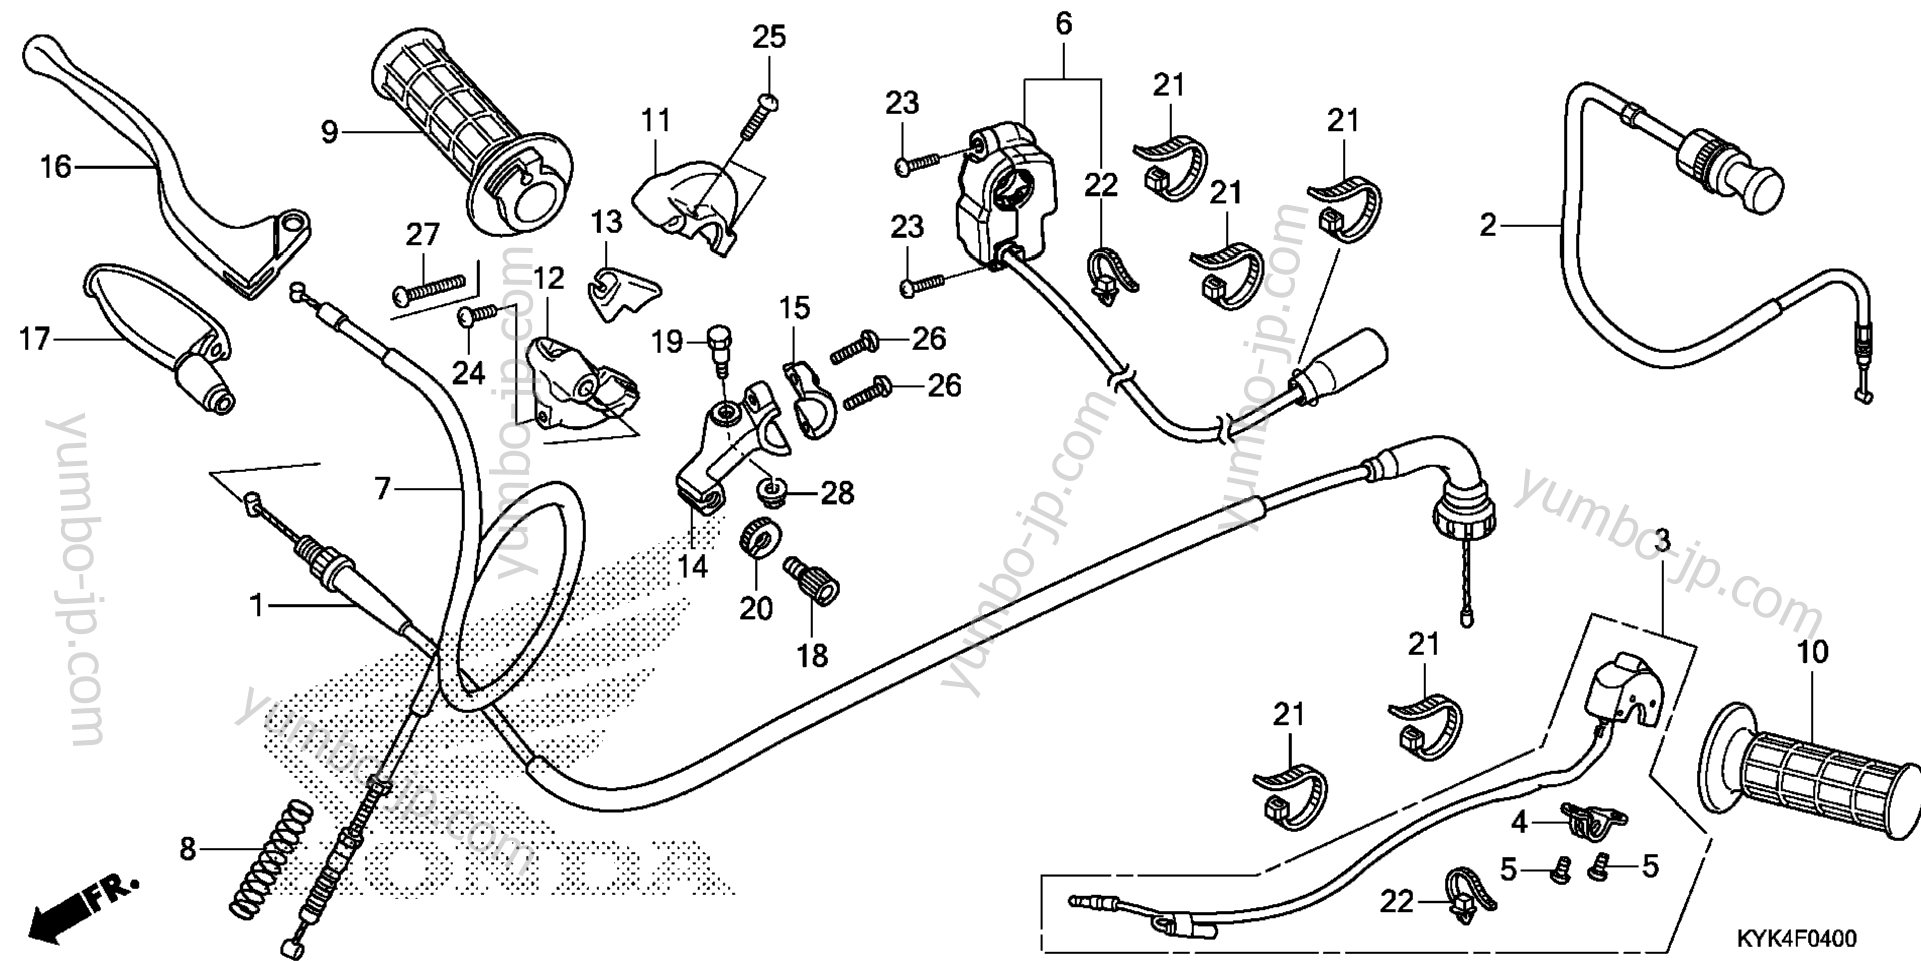 HANDLE LEVER / SWITCH / CABLE for motorcycles HONDA CRF110F AC 2014 year